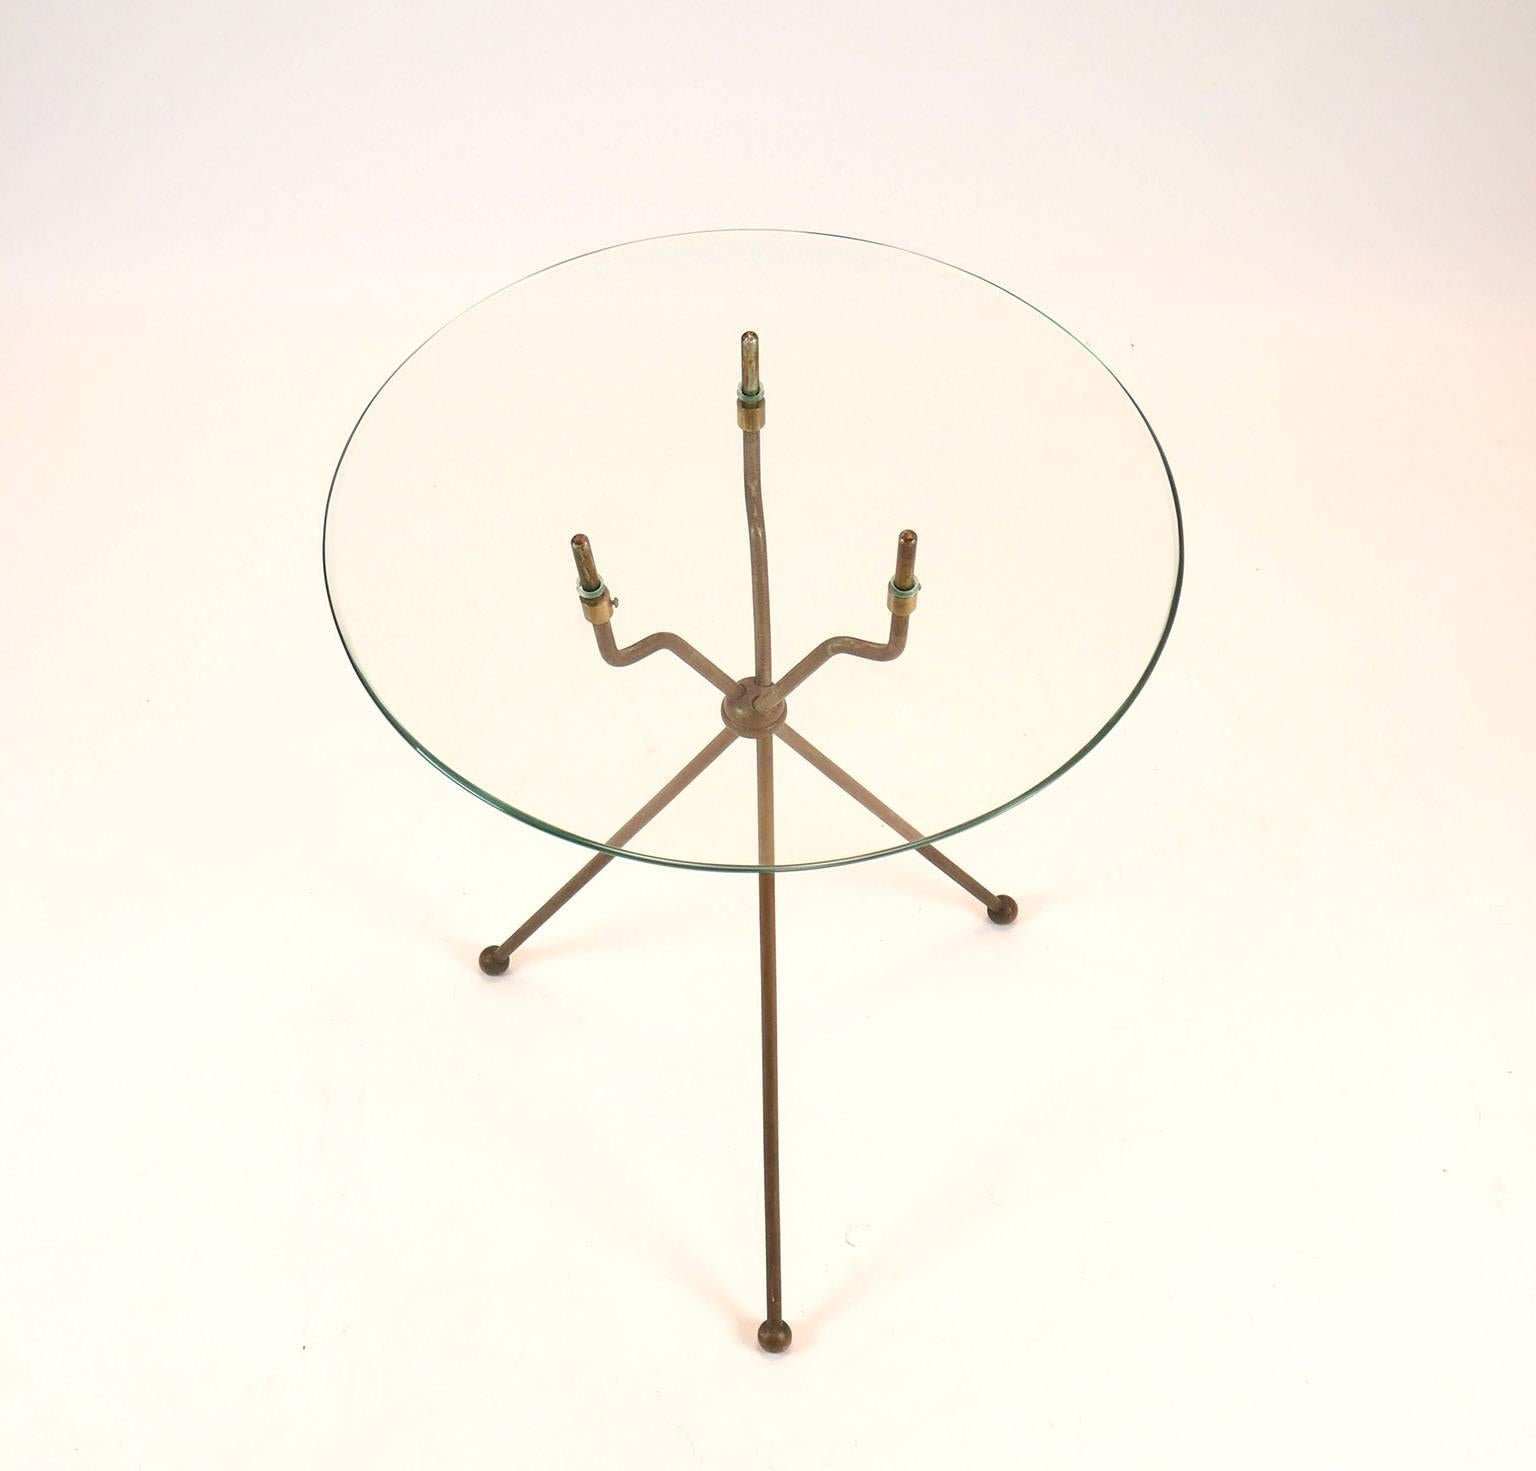 Very nice and rare side  table design attruibuted to Gino  Sarfatti  who together to the most modern and conceptual lamps of 20th century also designed some small brass   furniture including small tables.
Here we find a Folding brass frame with a